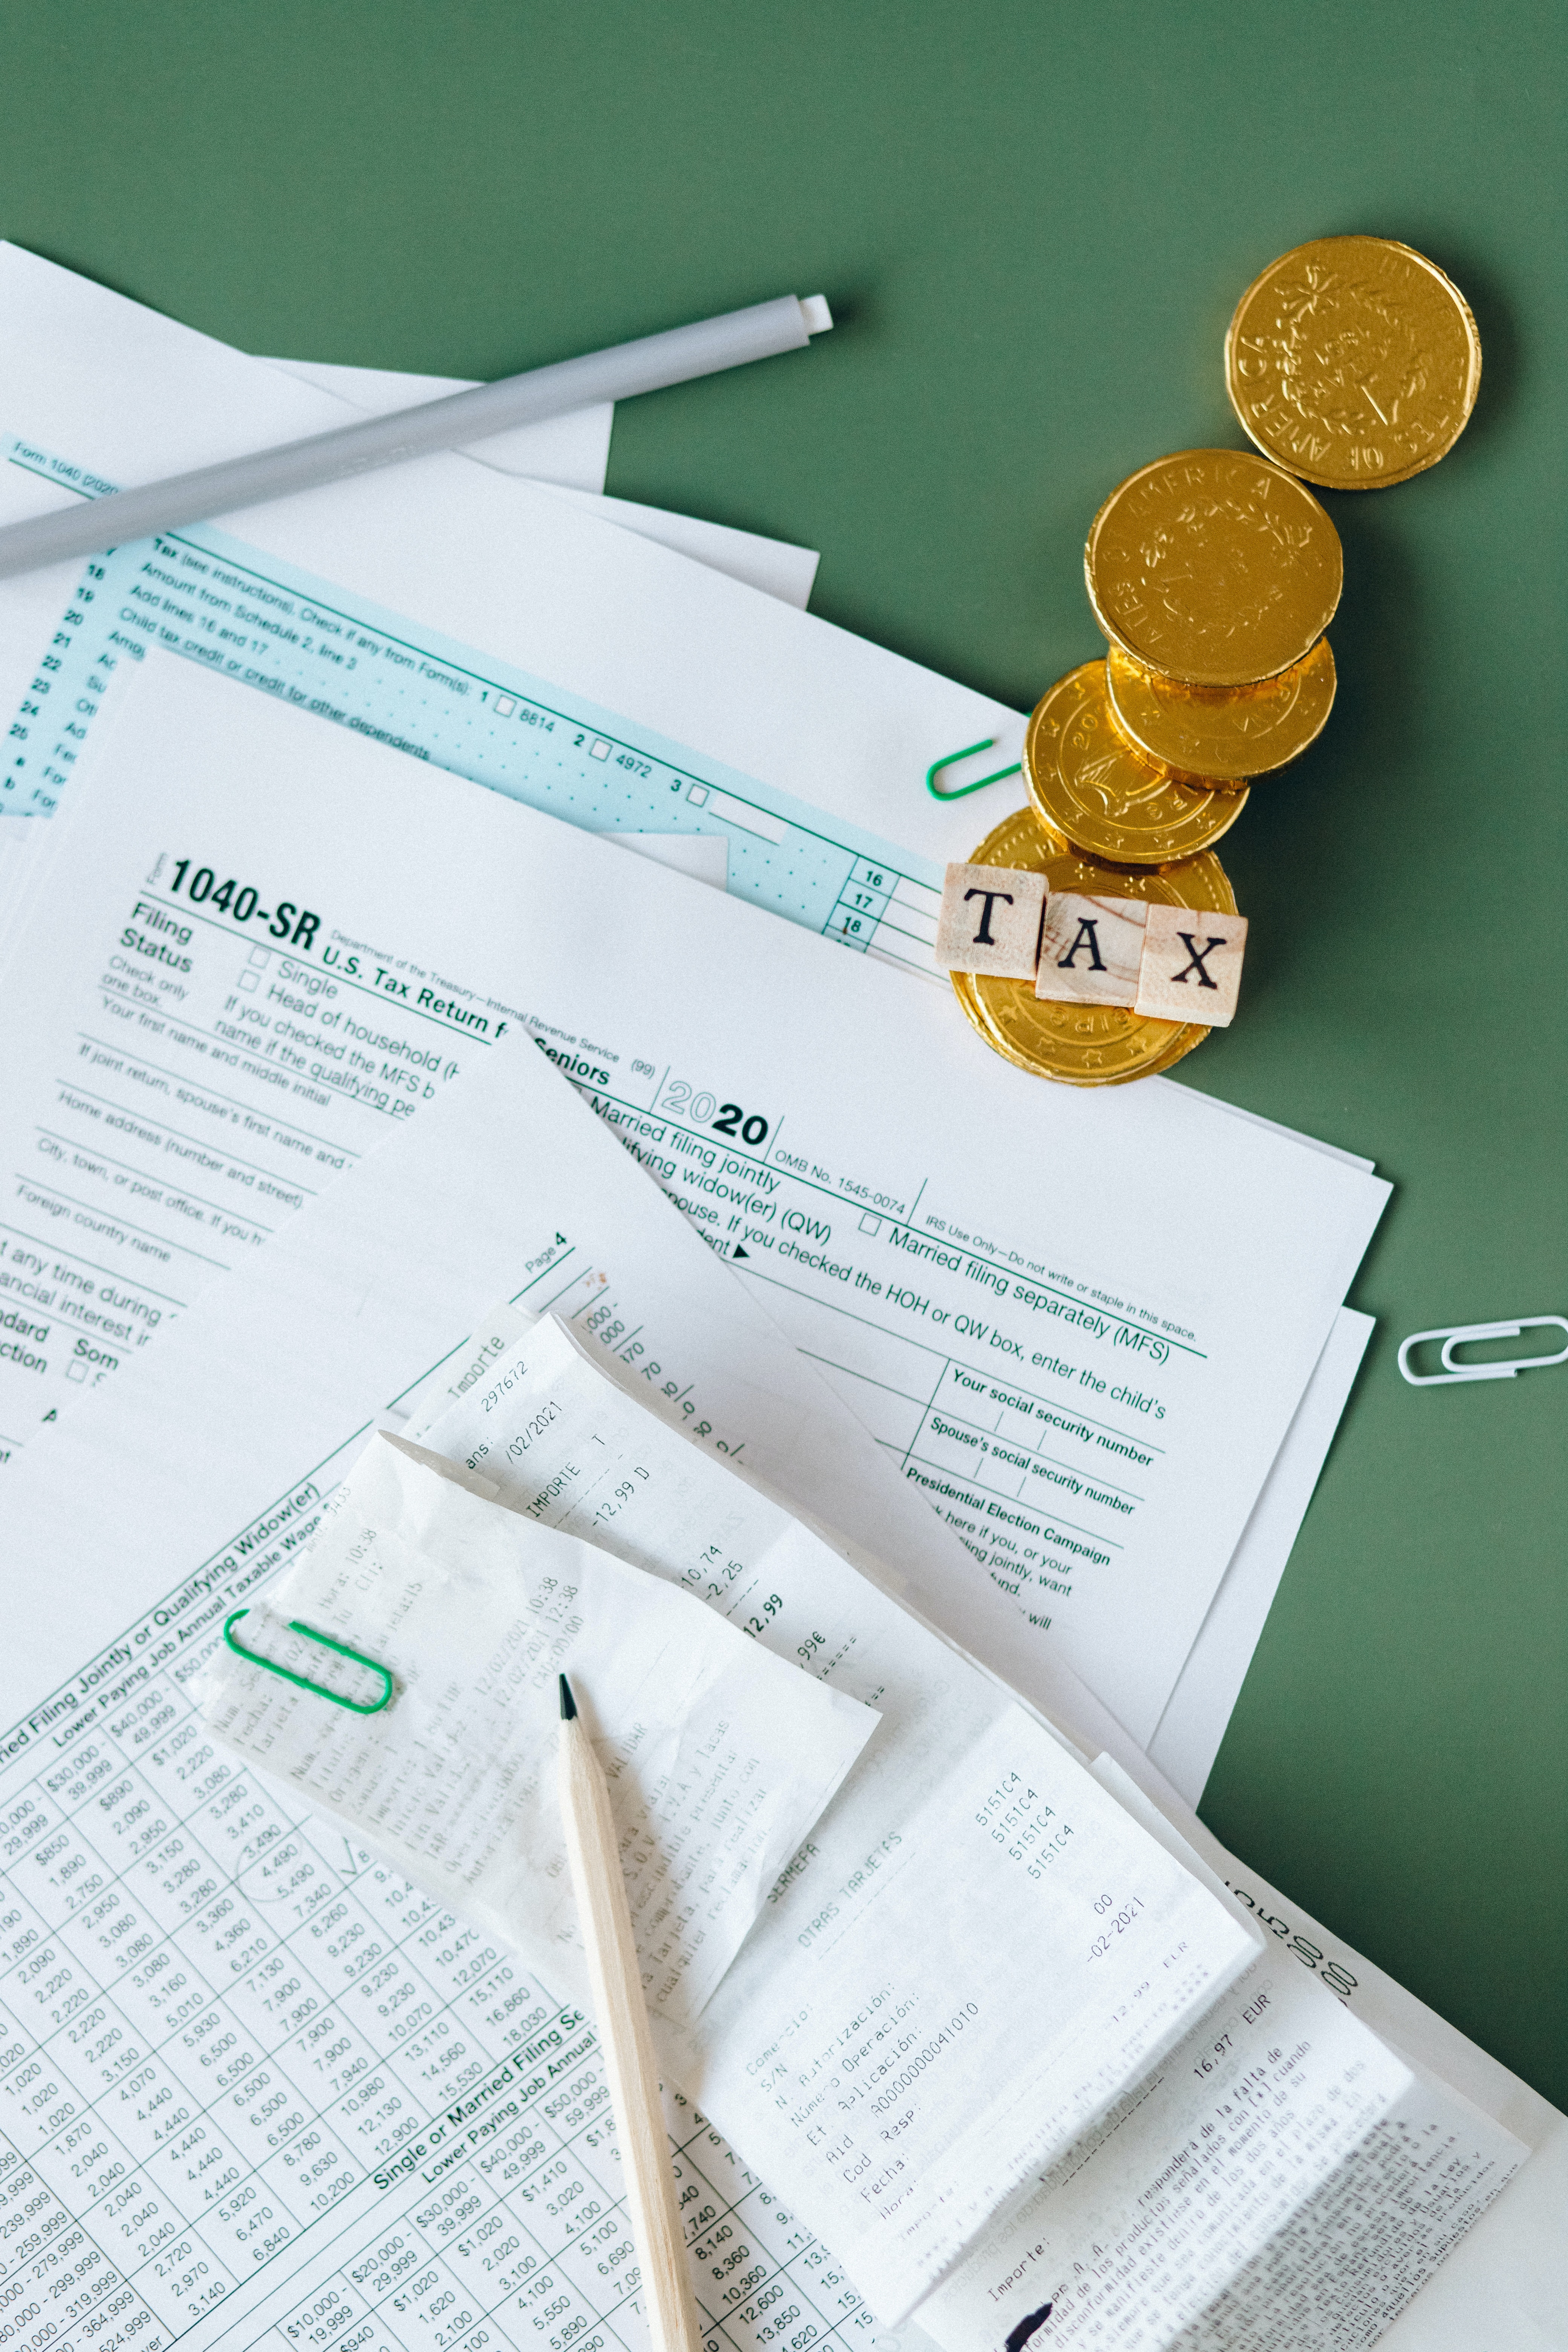 SUTA Tax 101: Easy state by state SUTA Tax Requirements for Employers